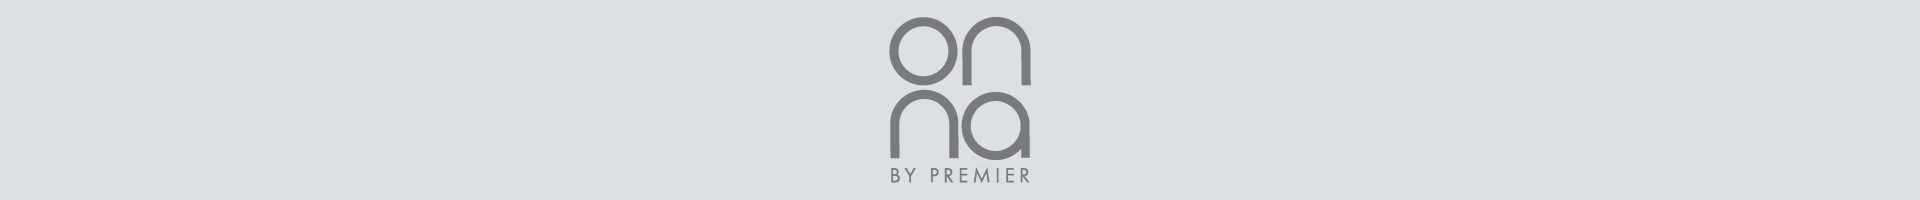 Onna By Premier